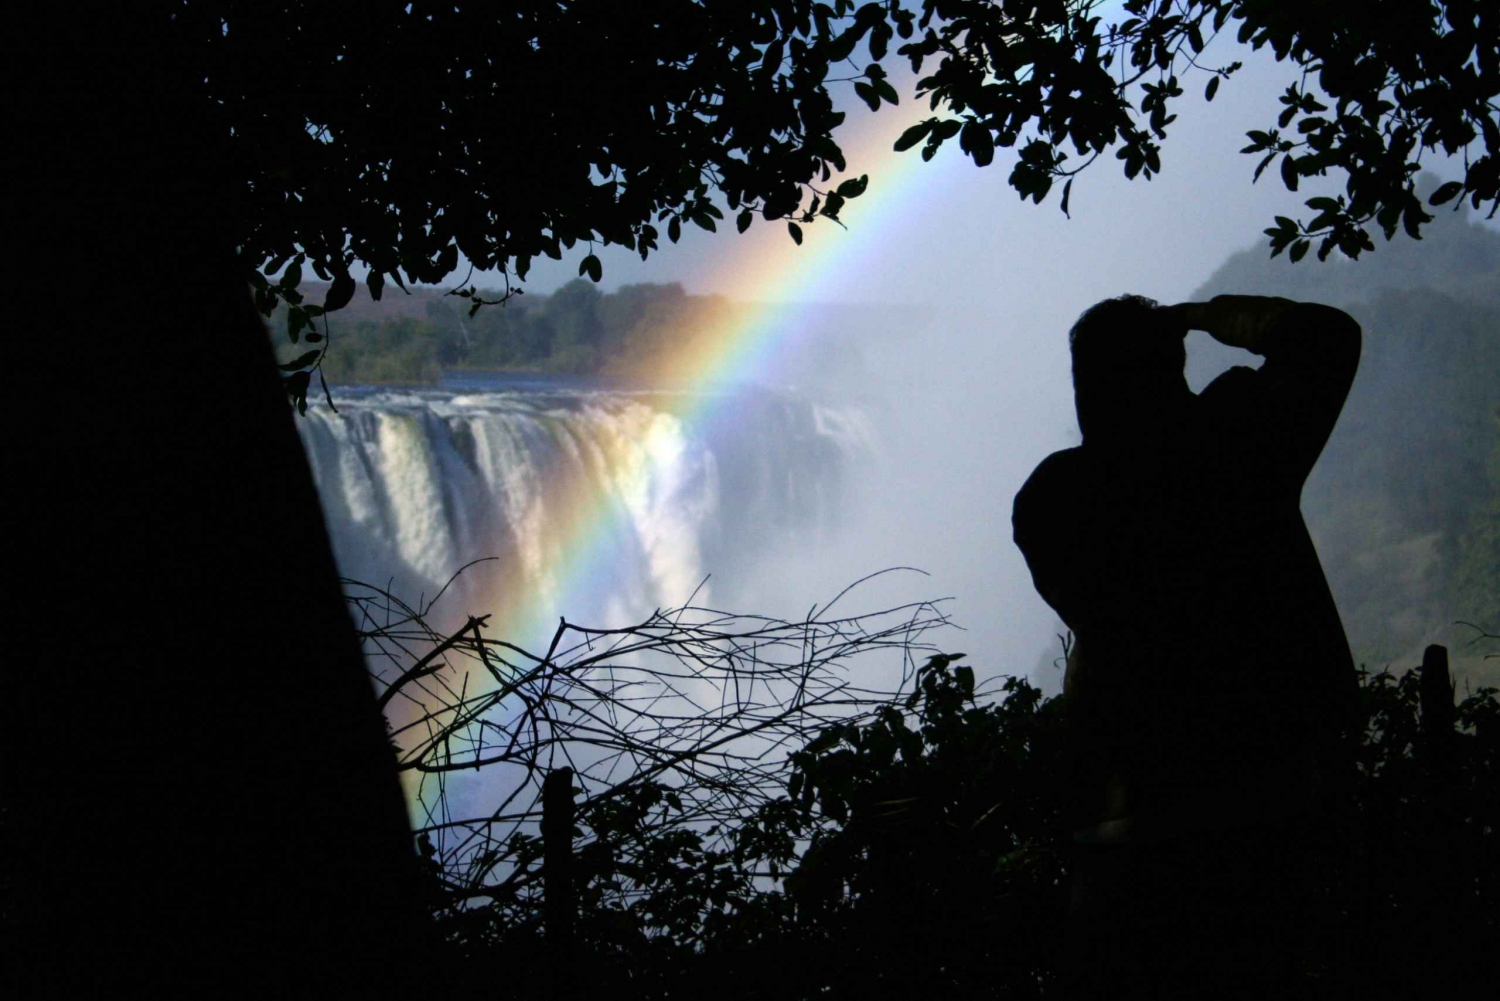 1-Day Victoria Falls Experience from Livingstone